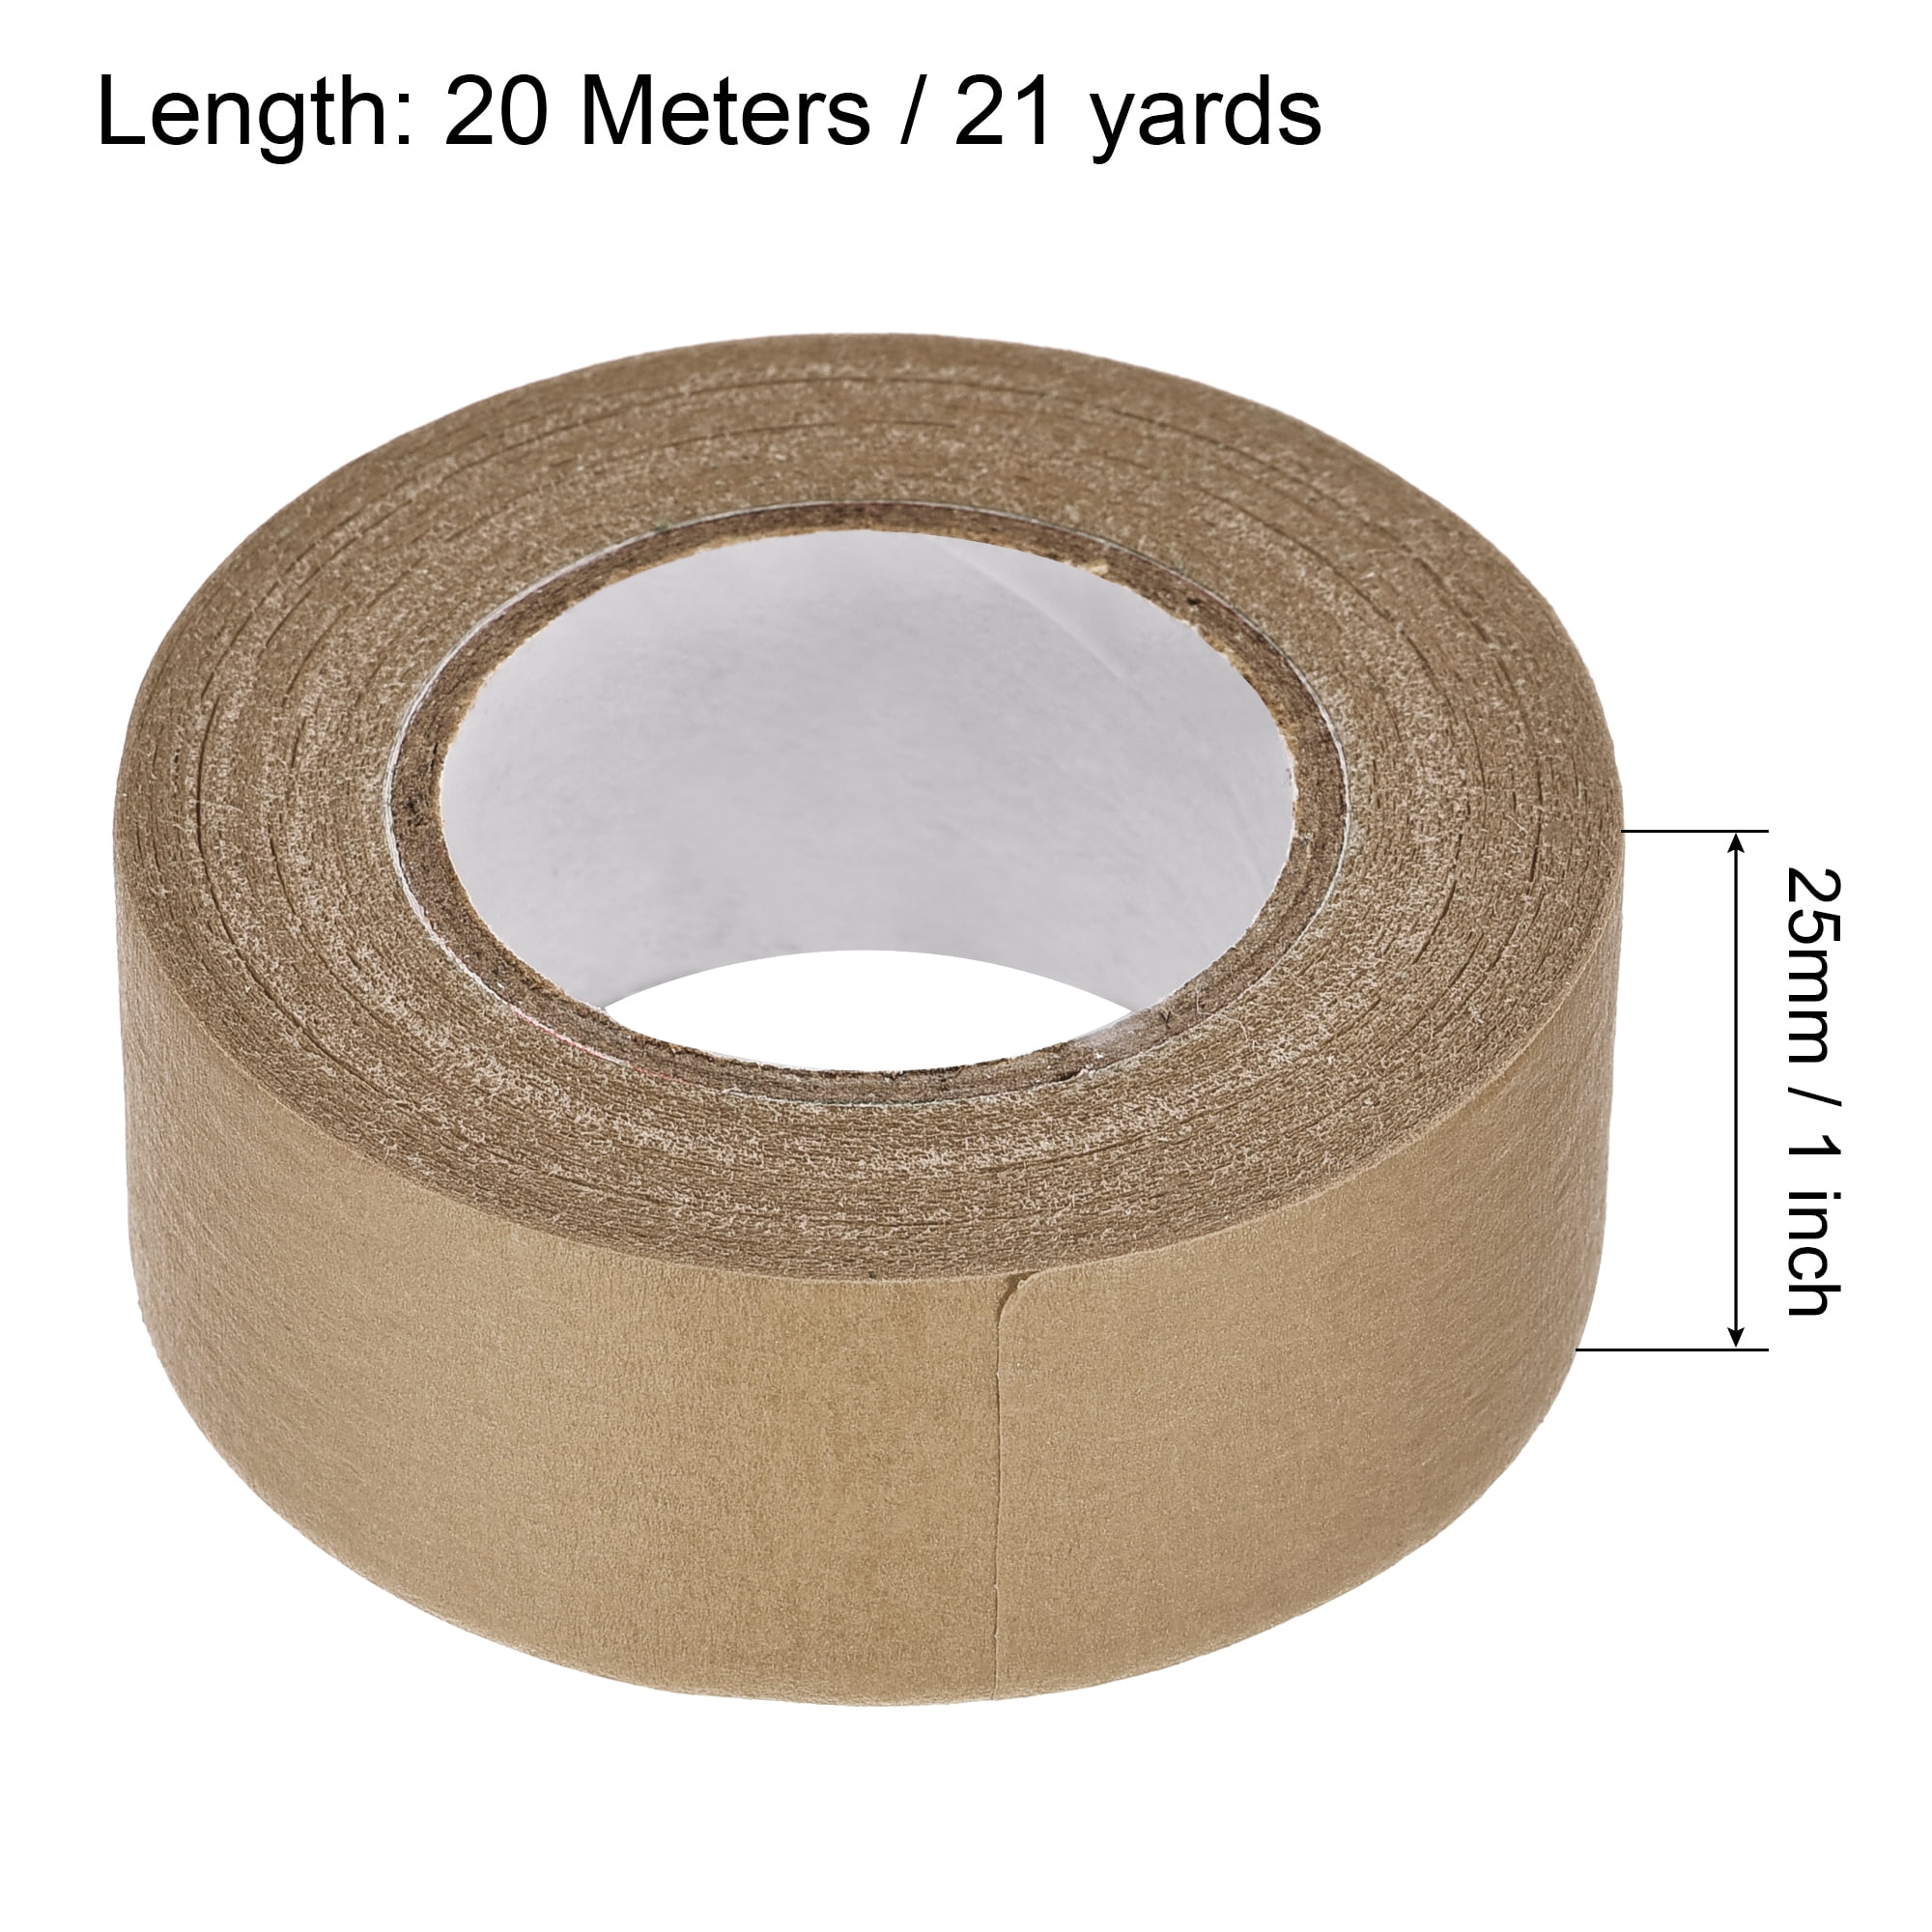 Uxcell 3Pcs 25mm 1 inch Wide 20m 21 Yards Masking Tape Painters Tape Rolls  White